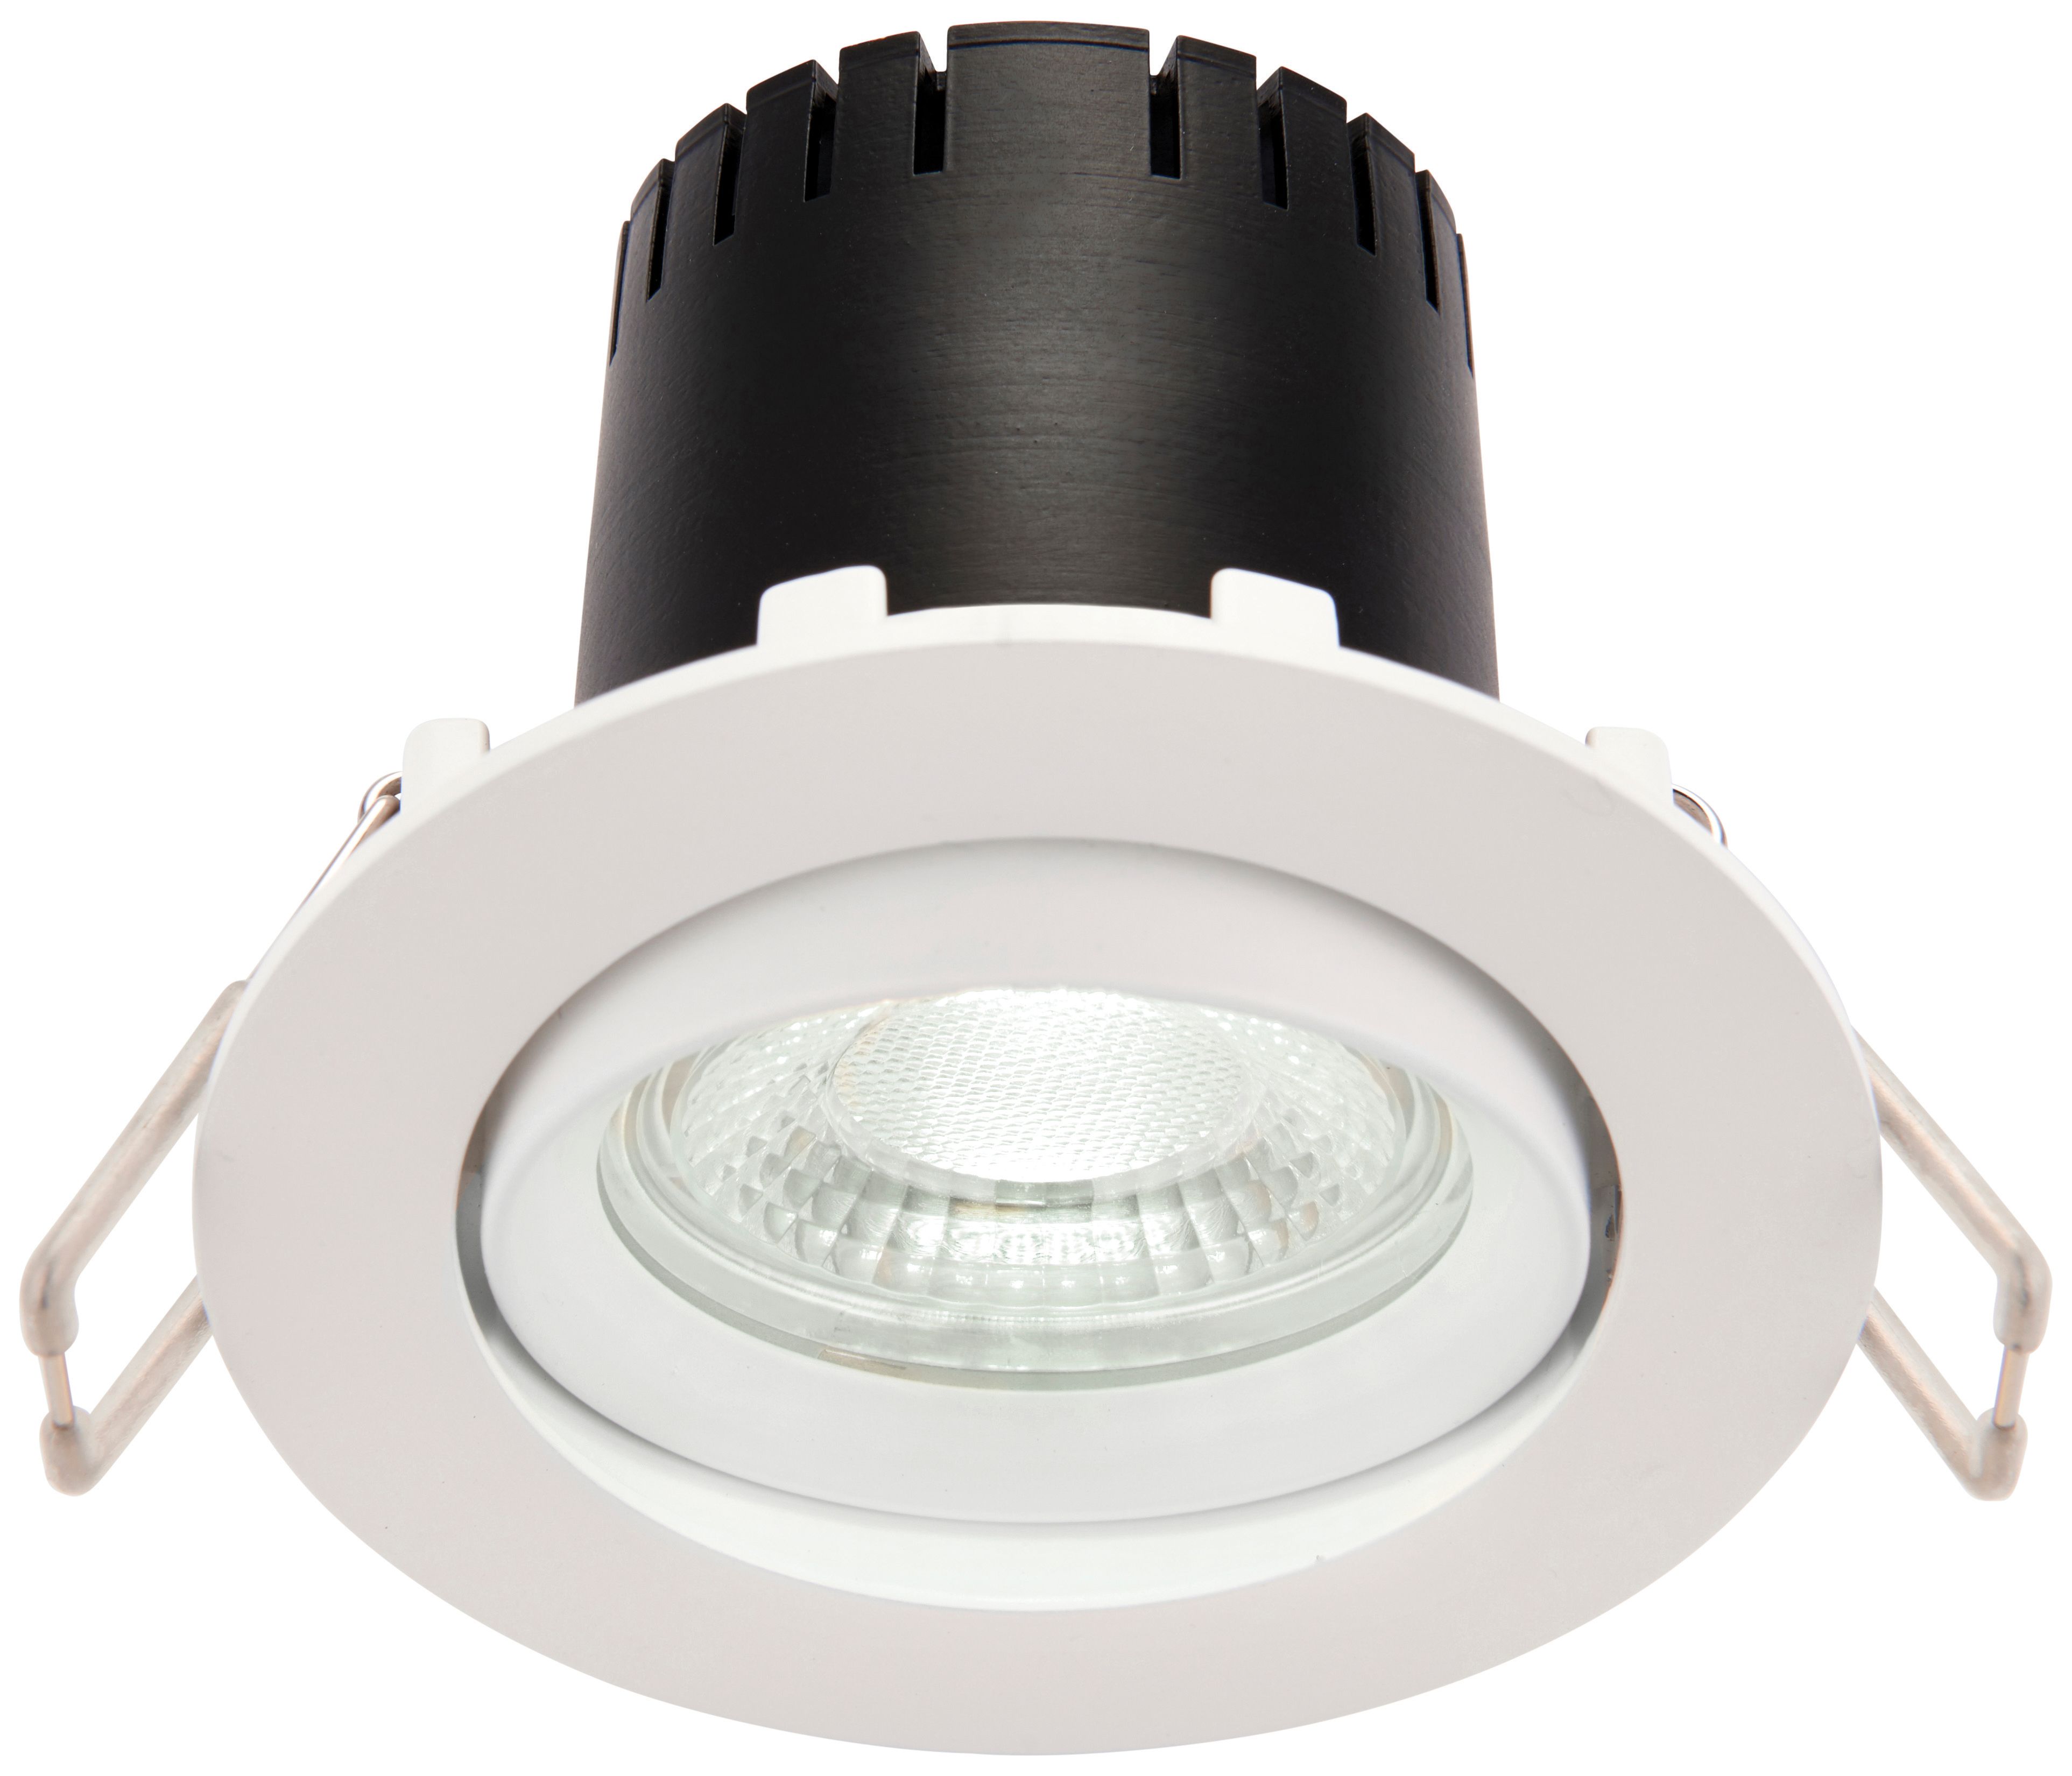 Saxby Integrated LED Adjustable Cool White Dimmable Downlight 5.5W - Matt White